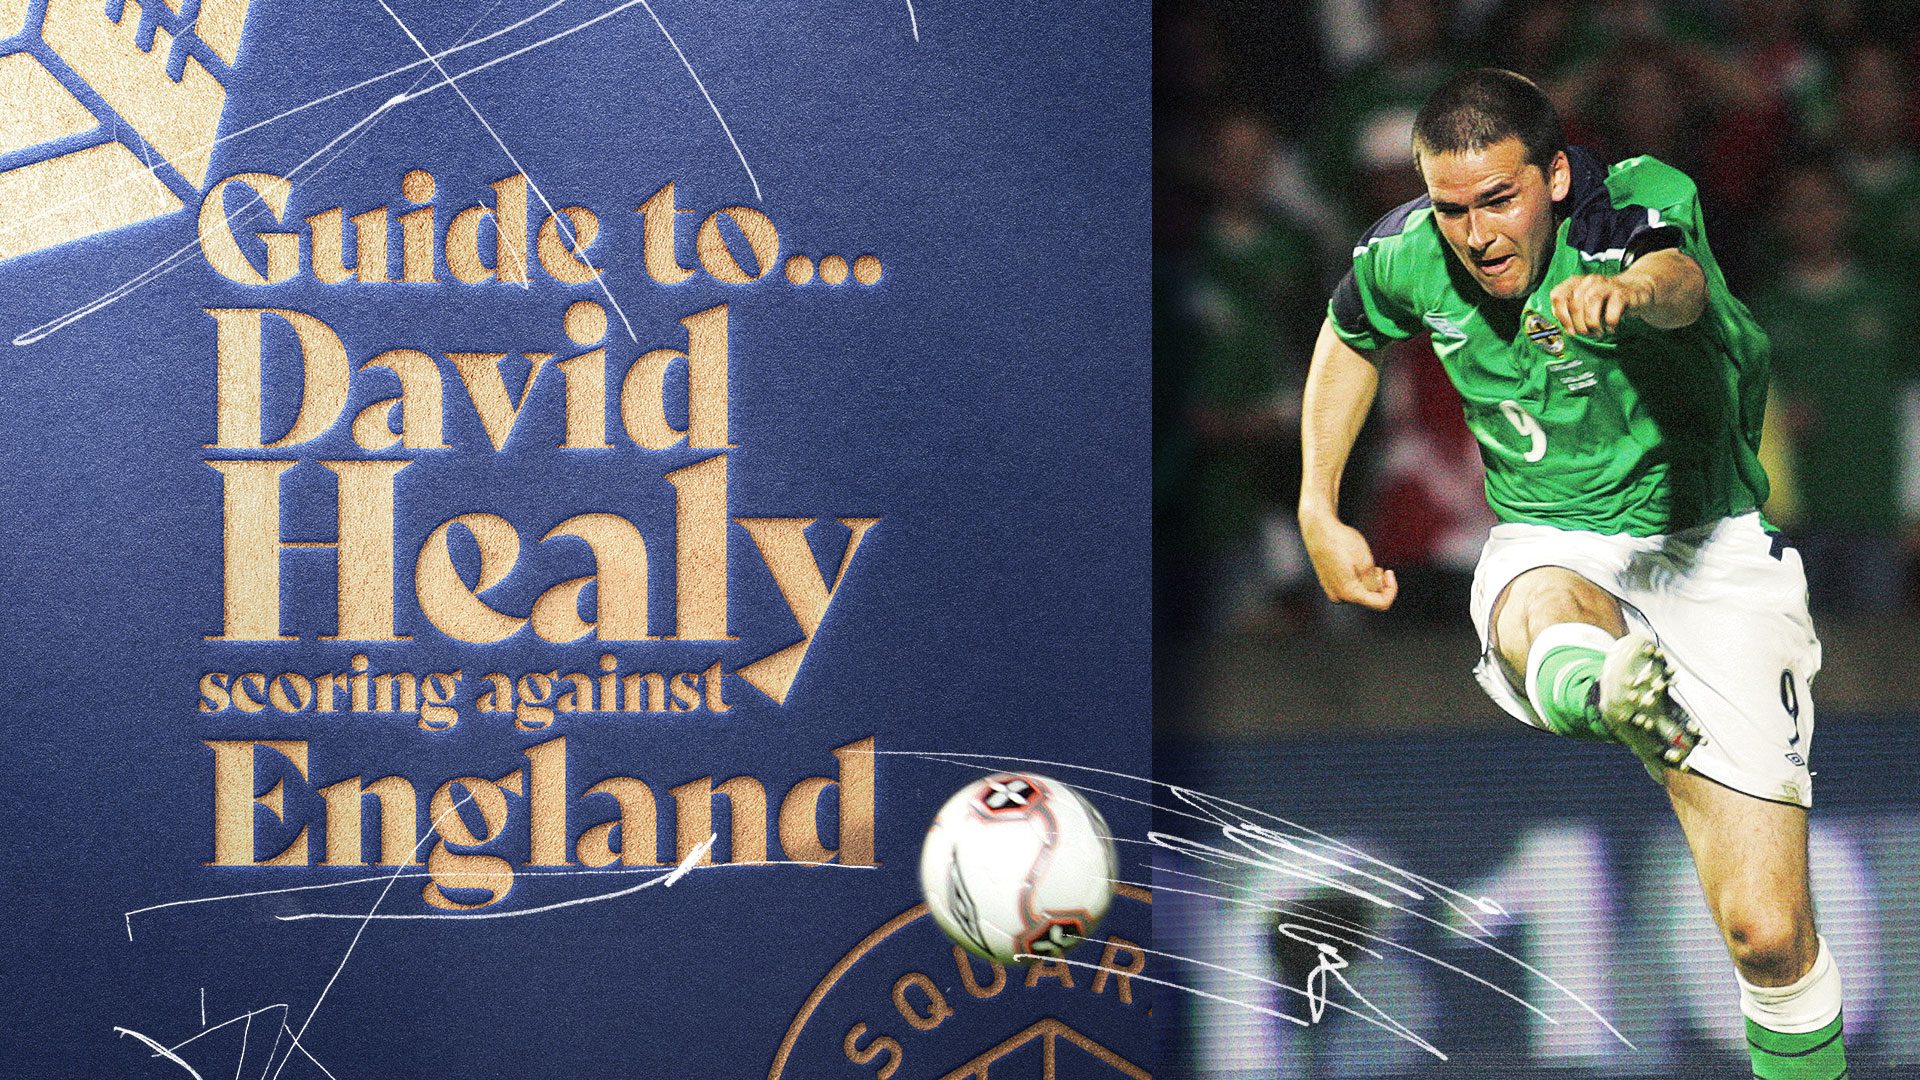 GUIDE_DAVID_HEALY_SCORING_AGAINST_ENGLAND